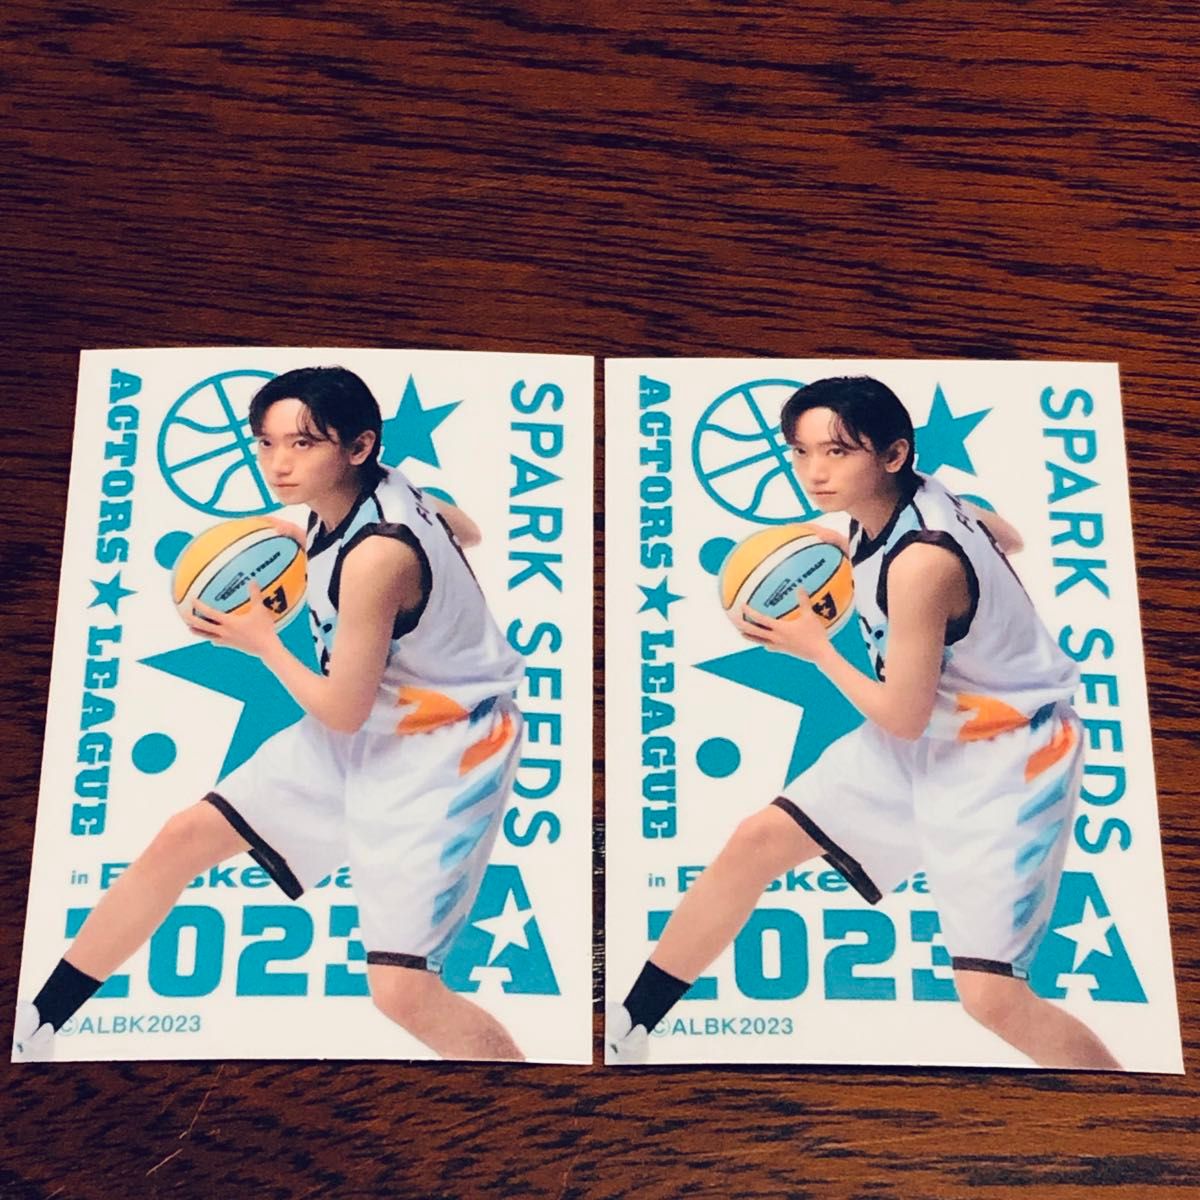 ACTORS☆LEAGUE in Basketball 2023 ステッカー